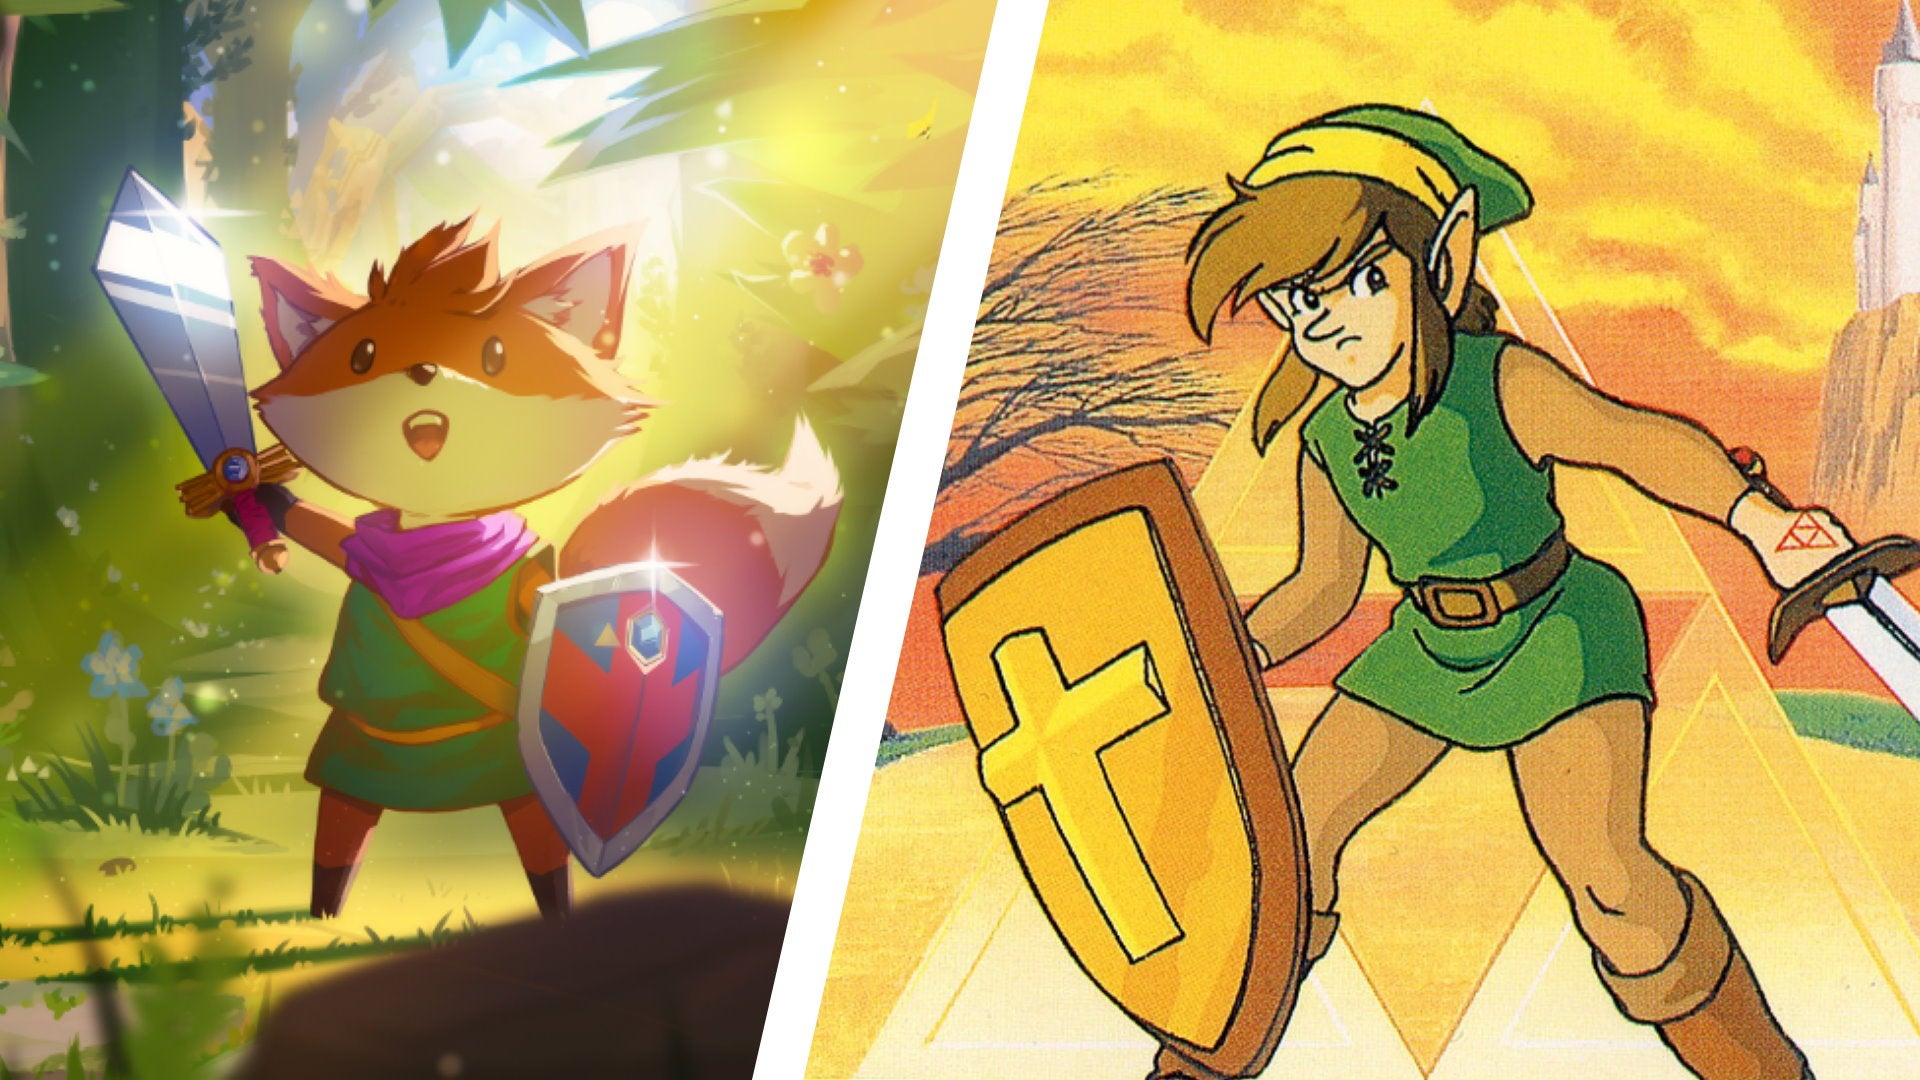 The fox from Tunic next to Link from Zelda II: The Adventure Of Link